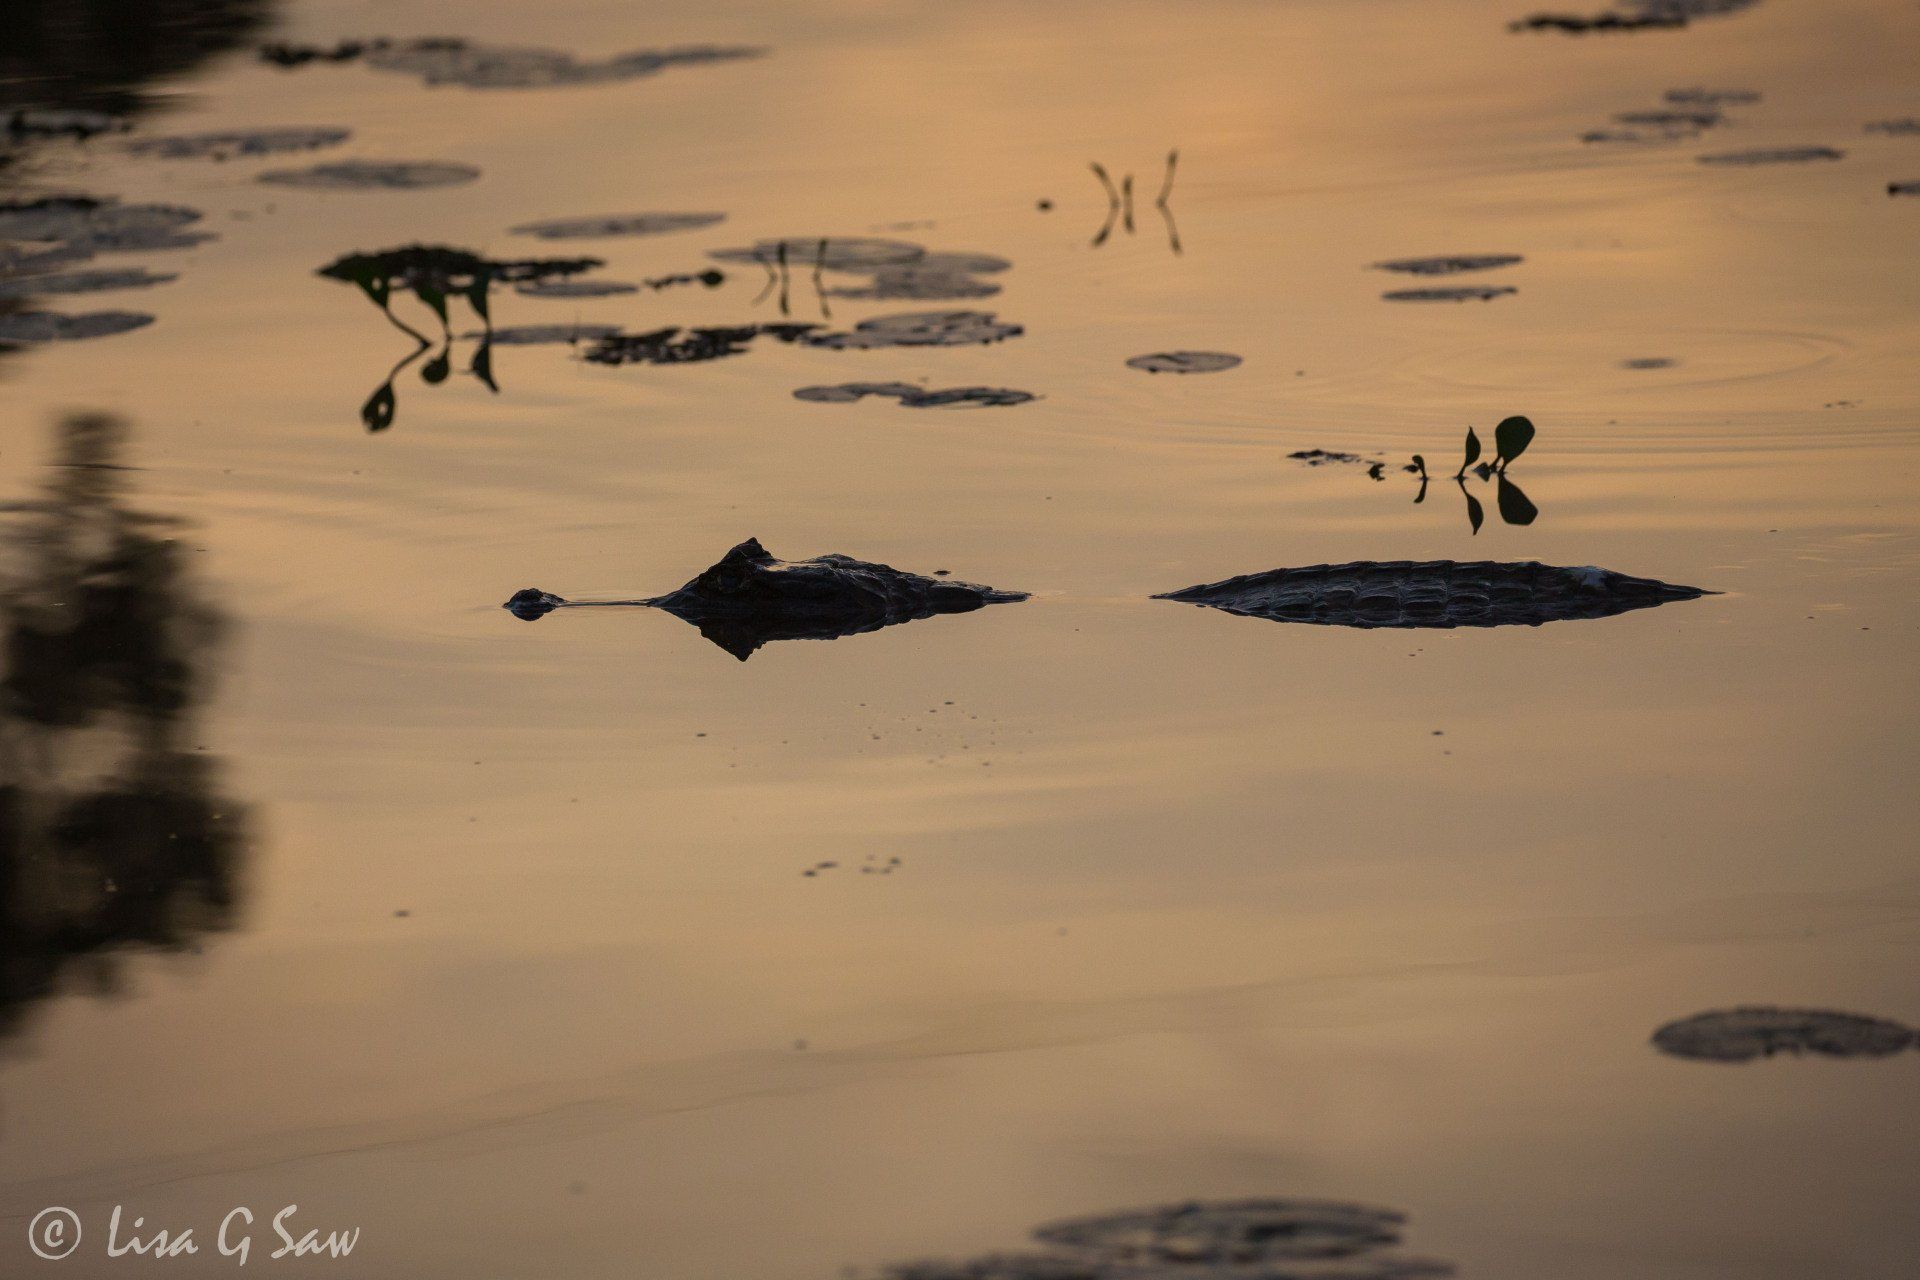 Silhouette of Caiman in water at dusk